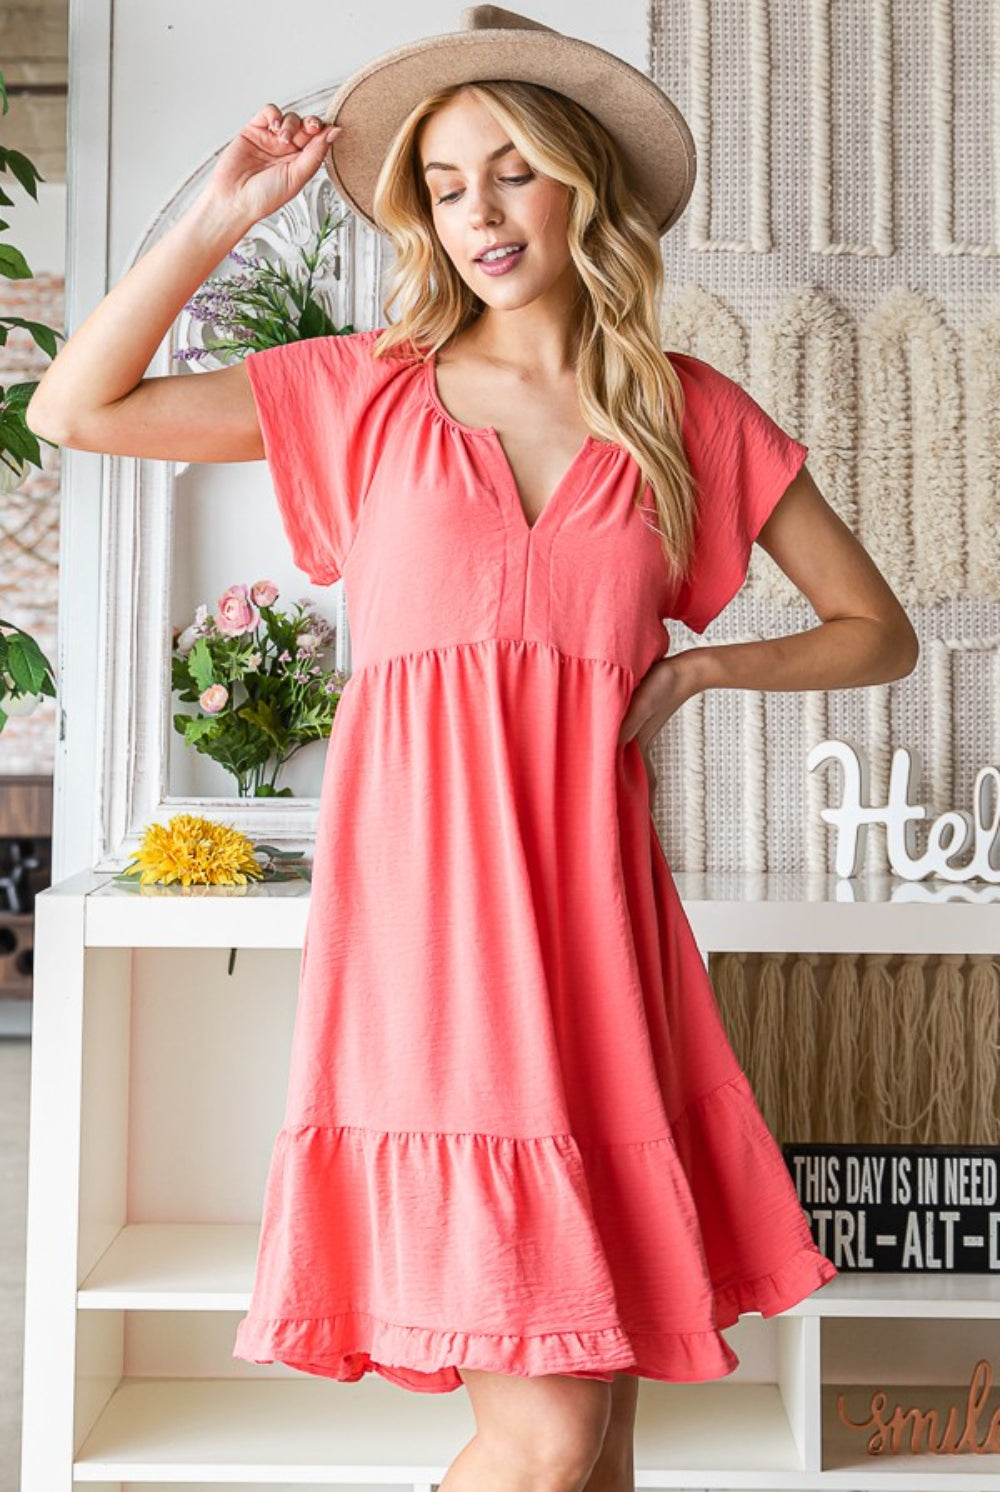 Woman smiling in a radiant coral summer dress with cap sleeves and ruffled hem.